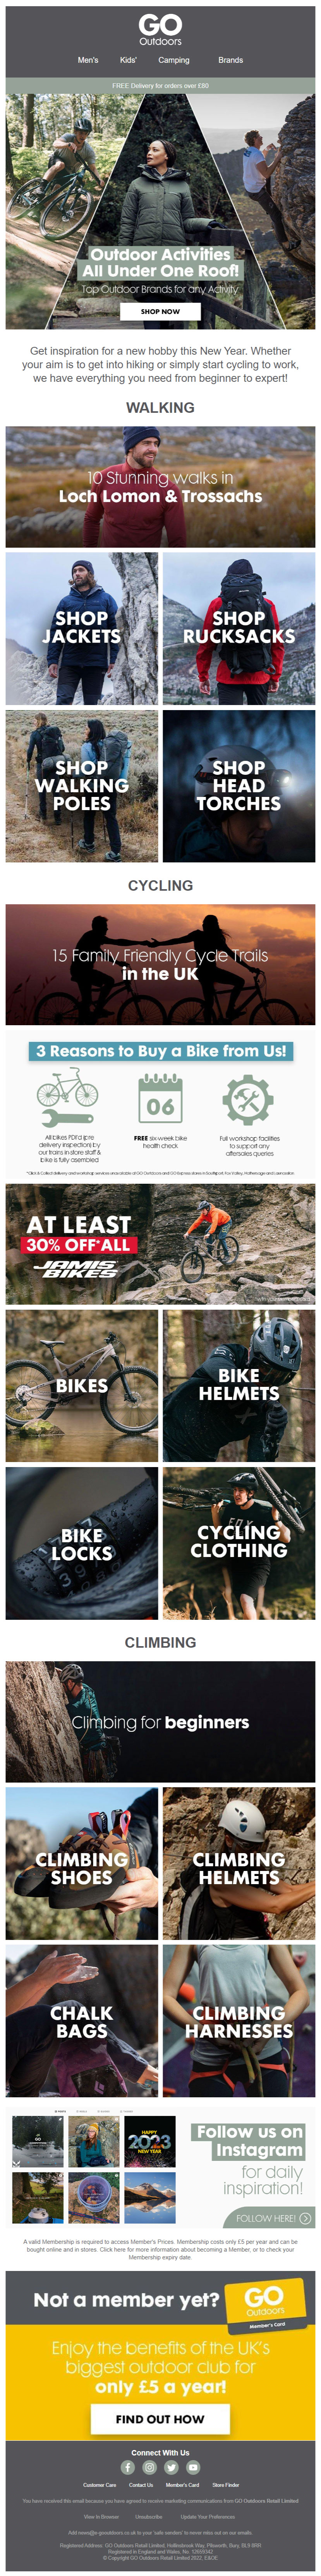 Go-Outdoors- New year email